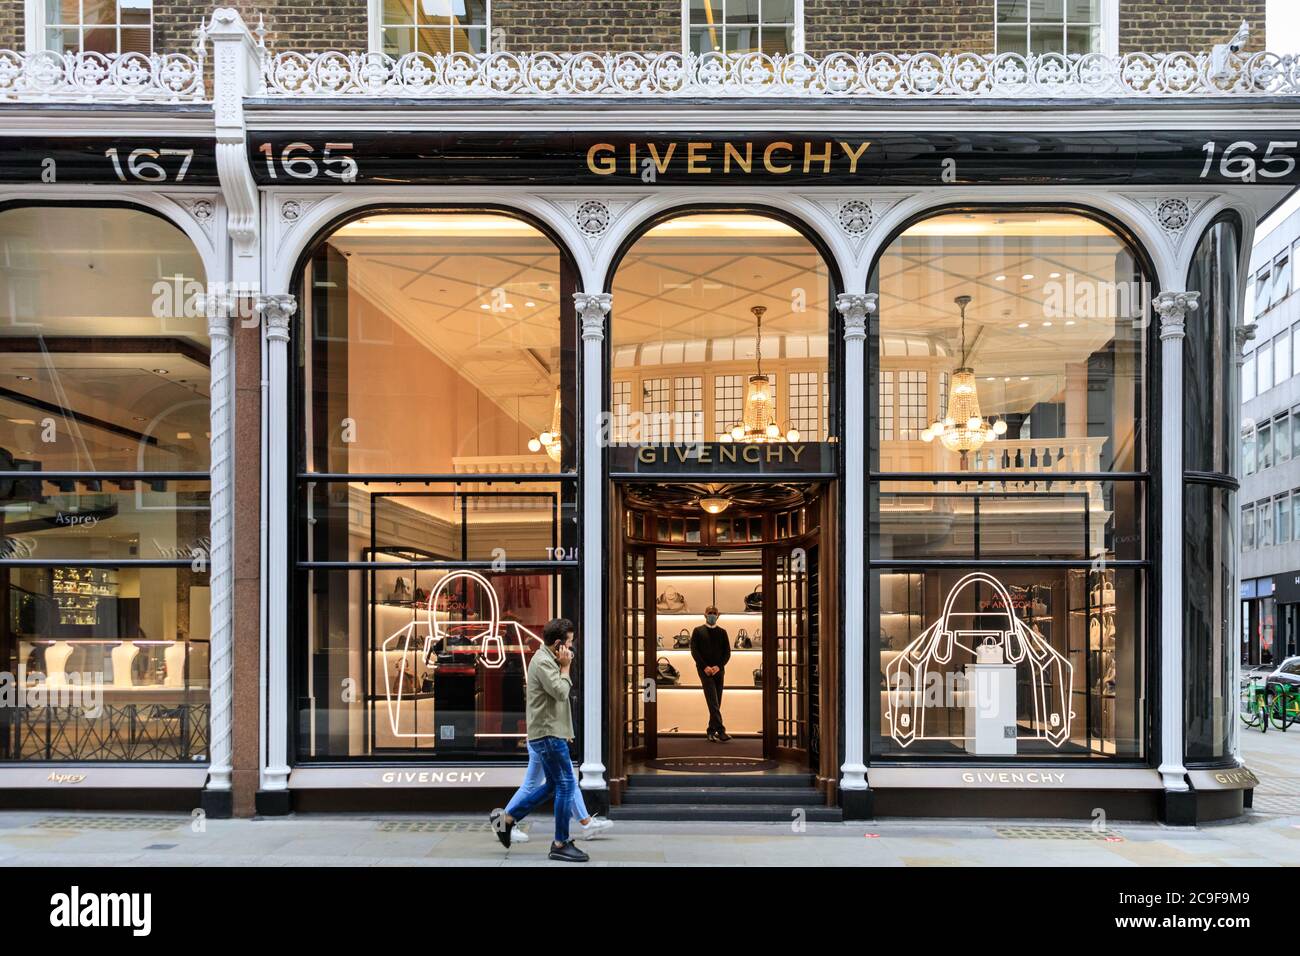 Givenchy luxury jeweler and jewelry brand flagship store exterior in New Bond Street, Mayfair, London, England, UK Stock Photo